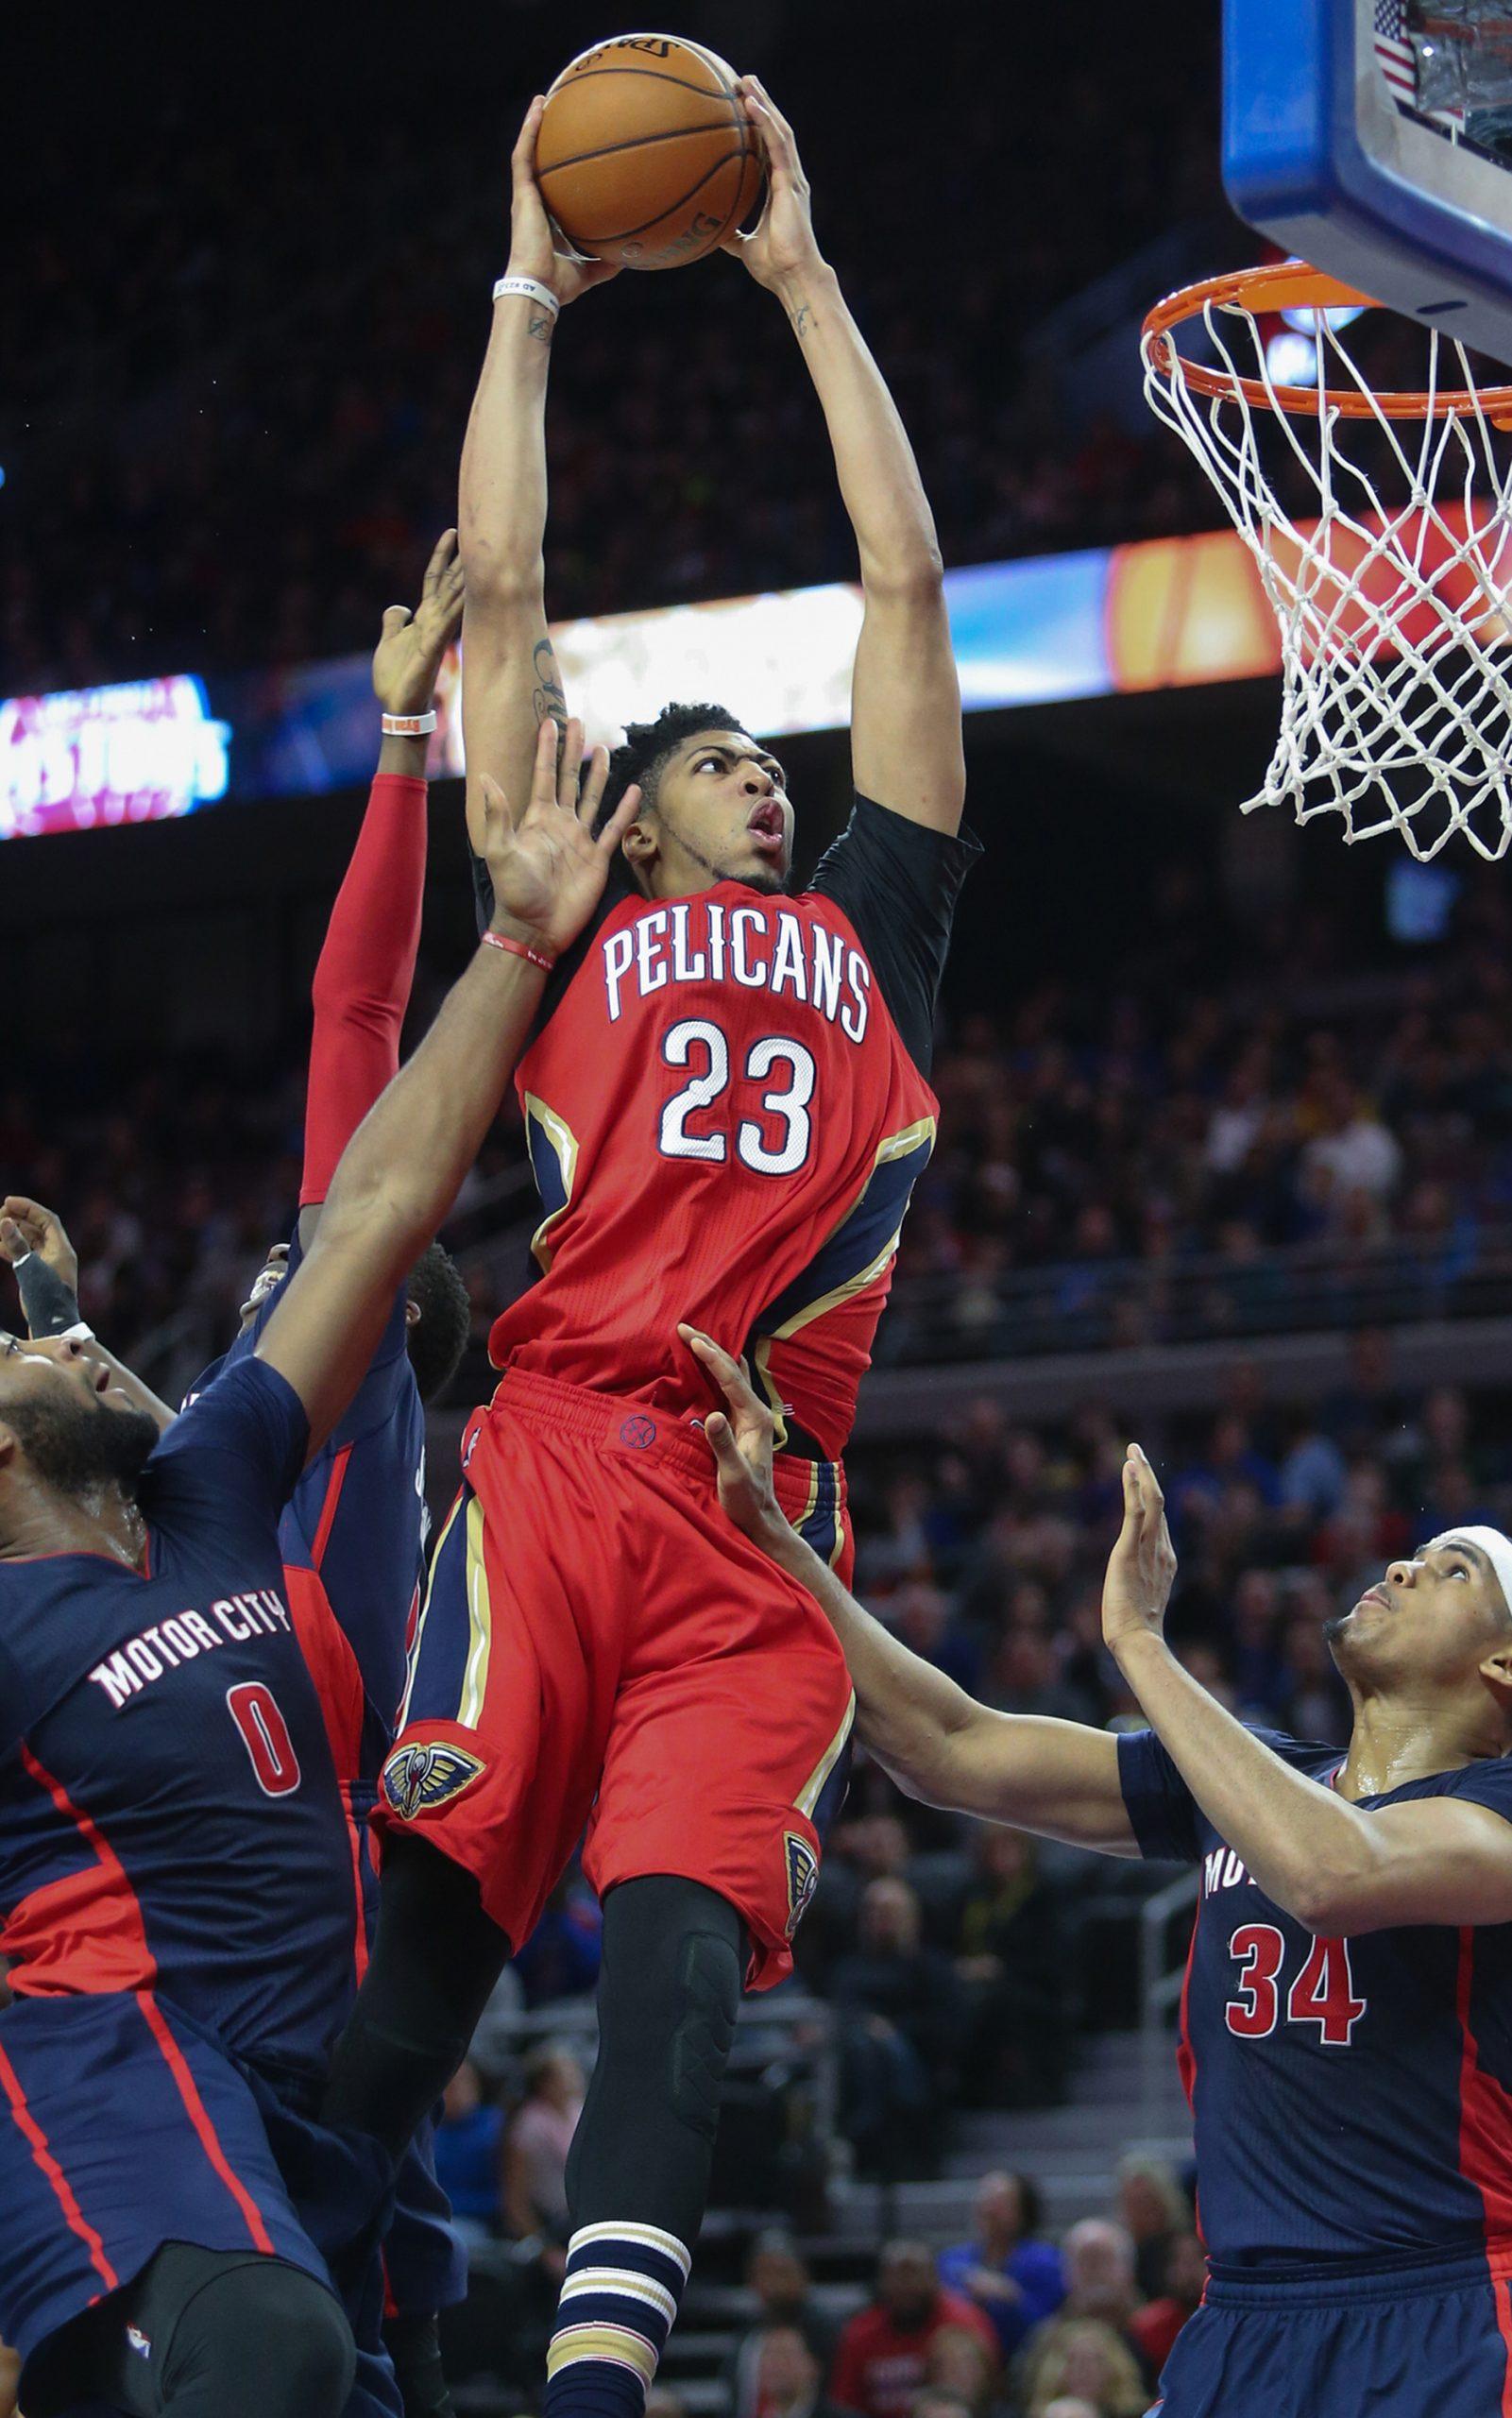 The New Orleans Pelicans Anthony Davis (23) muscles to the hoop during the fourth quarter against the Detroit Pistons on February 21, 2016, at the Palace of Auburn Hills in Auburn Hills, Mich. (Kirthmon F. Dozier/Detroit Free Press/TNS)